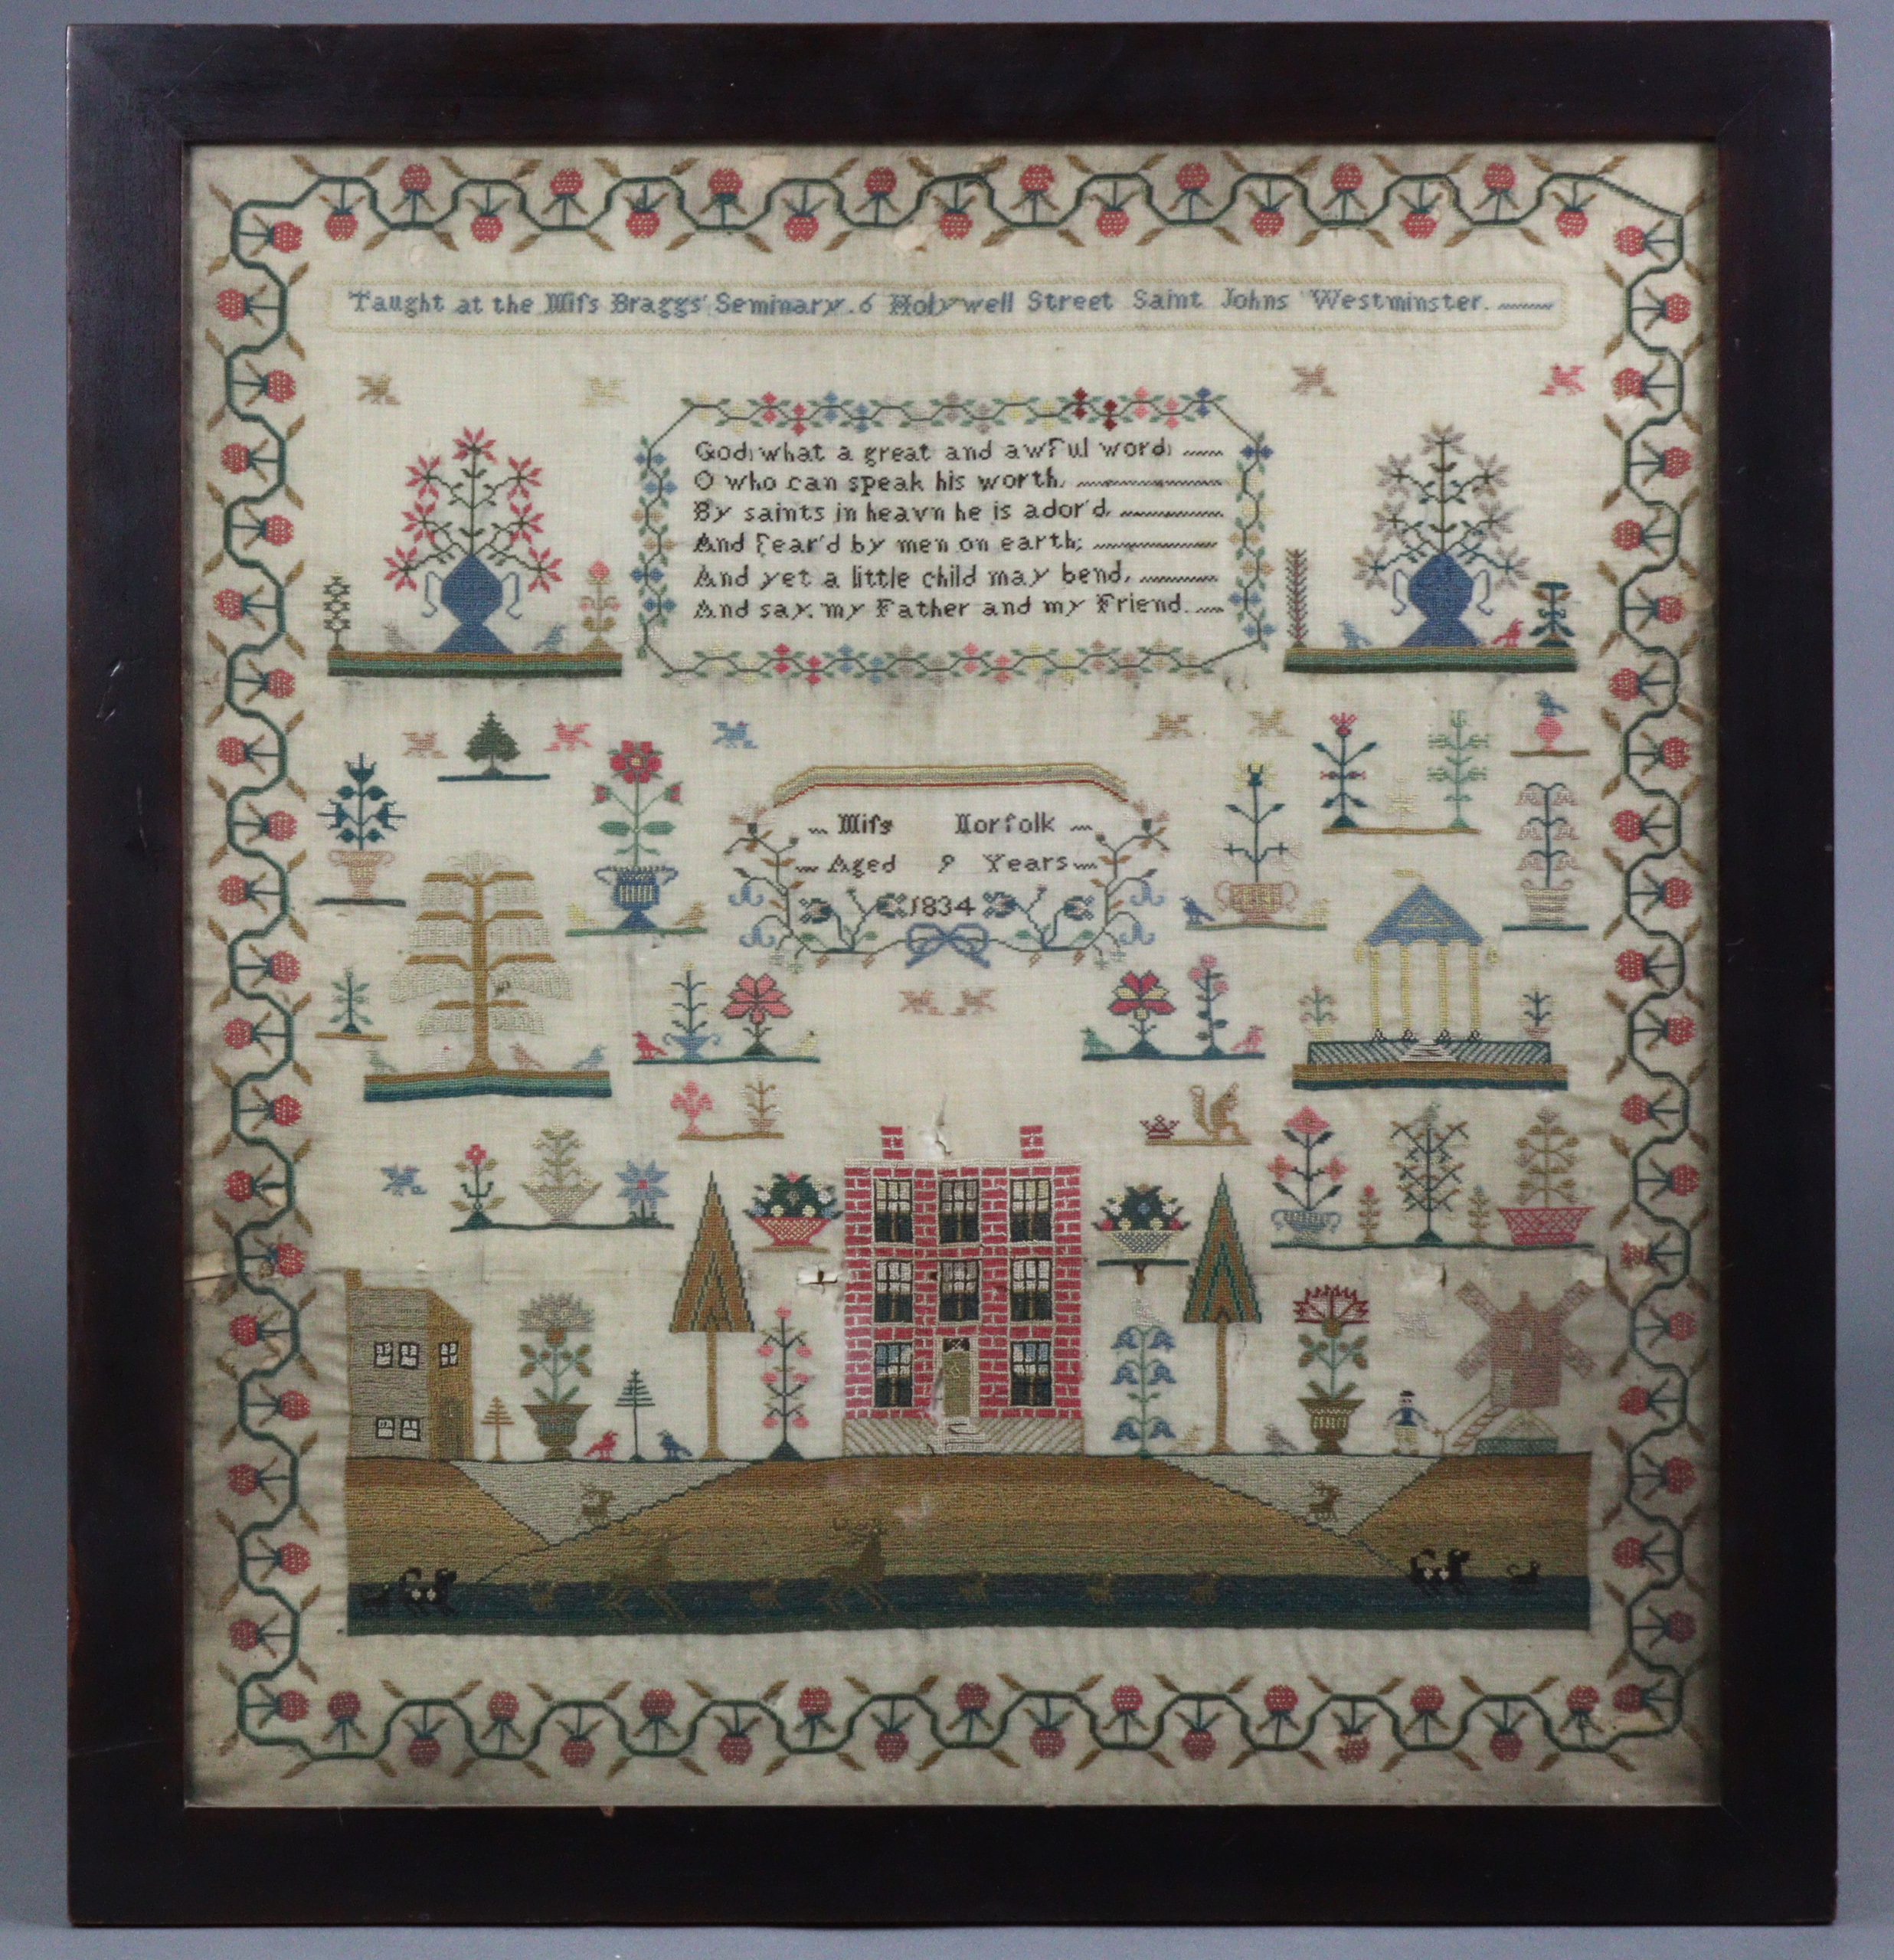 A WILLIAM IV SILK NEEDLEWORK SAMPLER, worked by “Miss Norfolk, Aged 9 Years”, dated 1834 to the